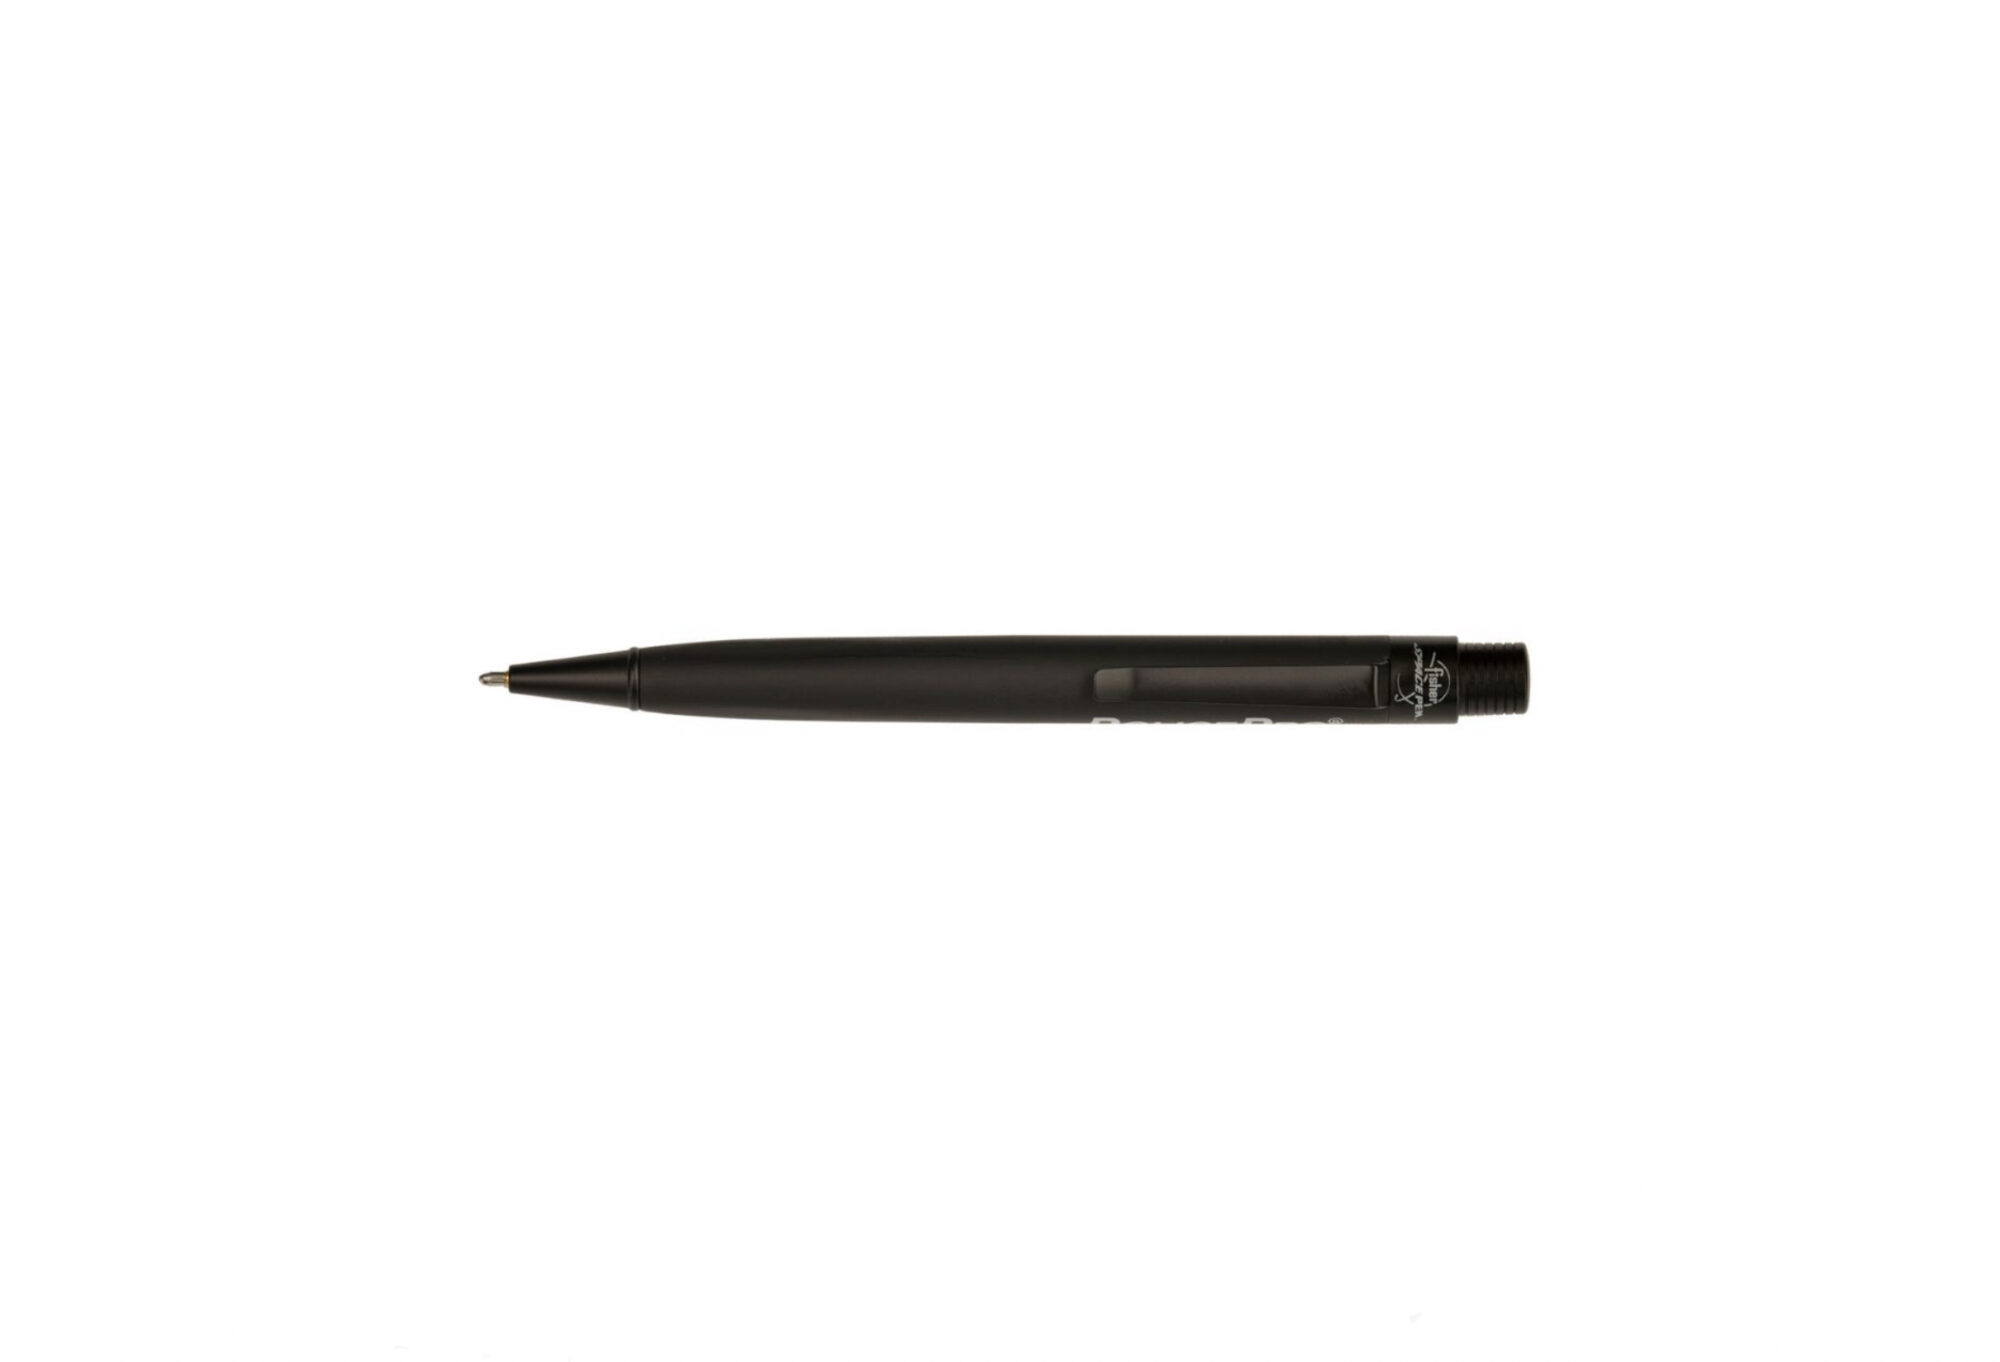 Police Pro Fisher Space Pen by Fulker Shop